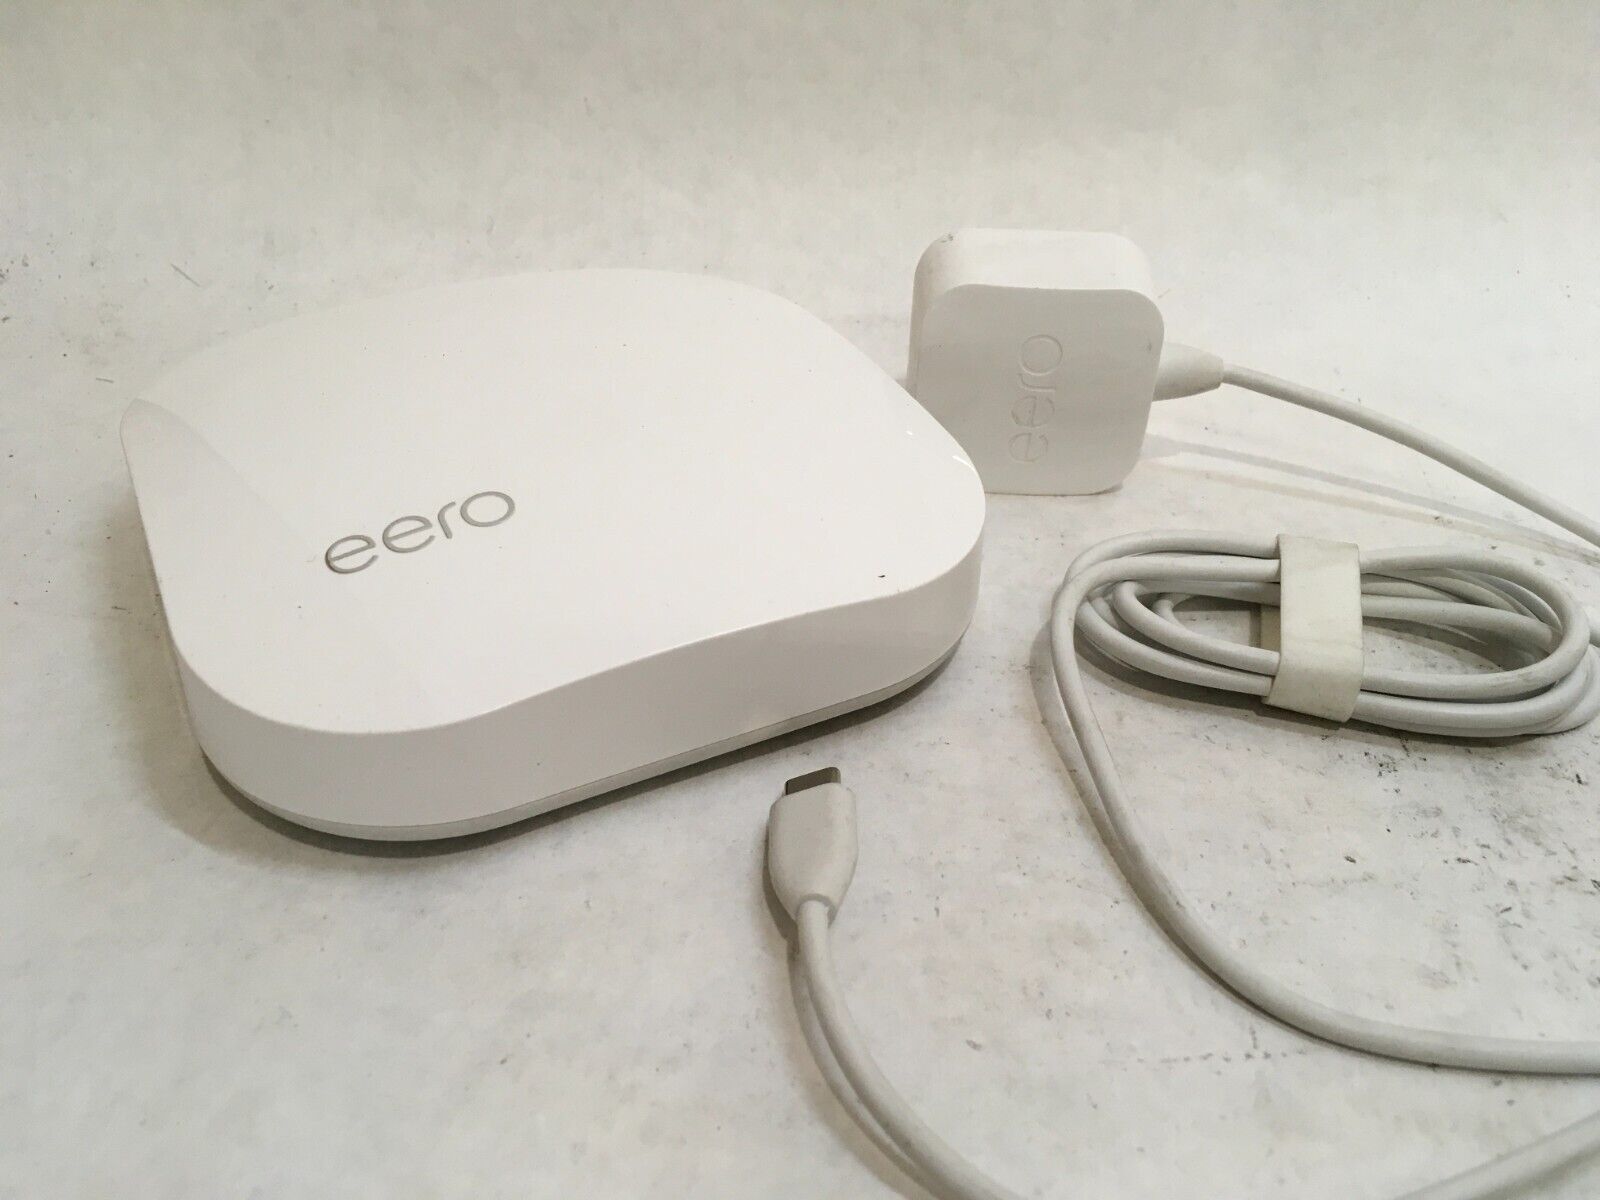 Eero B010001 Pro 2nd Generation Tri-Band AC Home Mesh Wifi Router w/ adapter